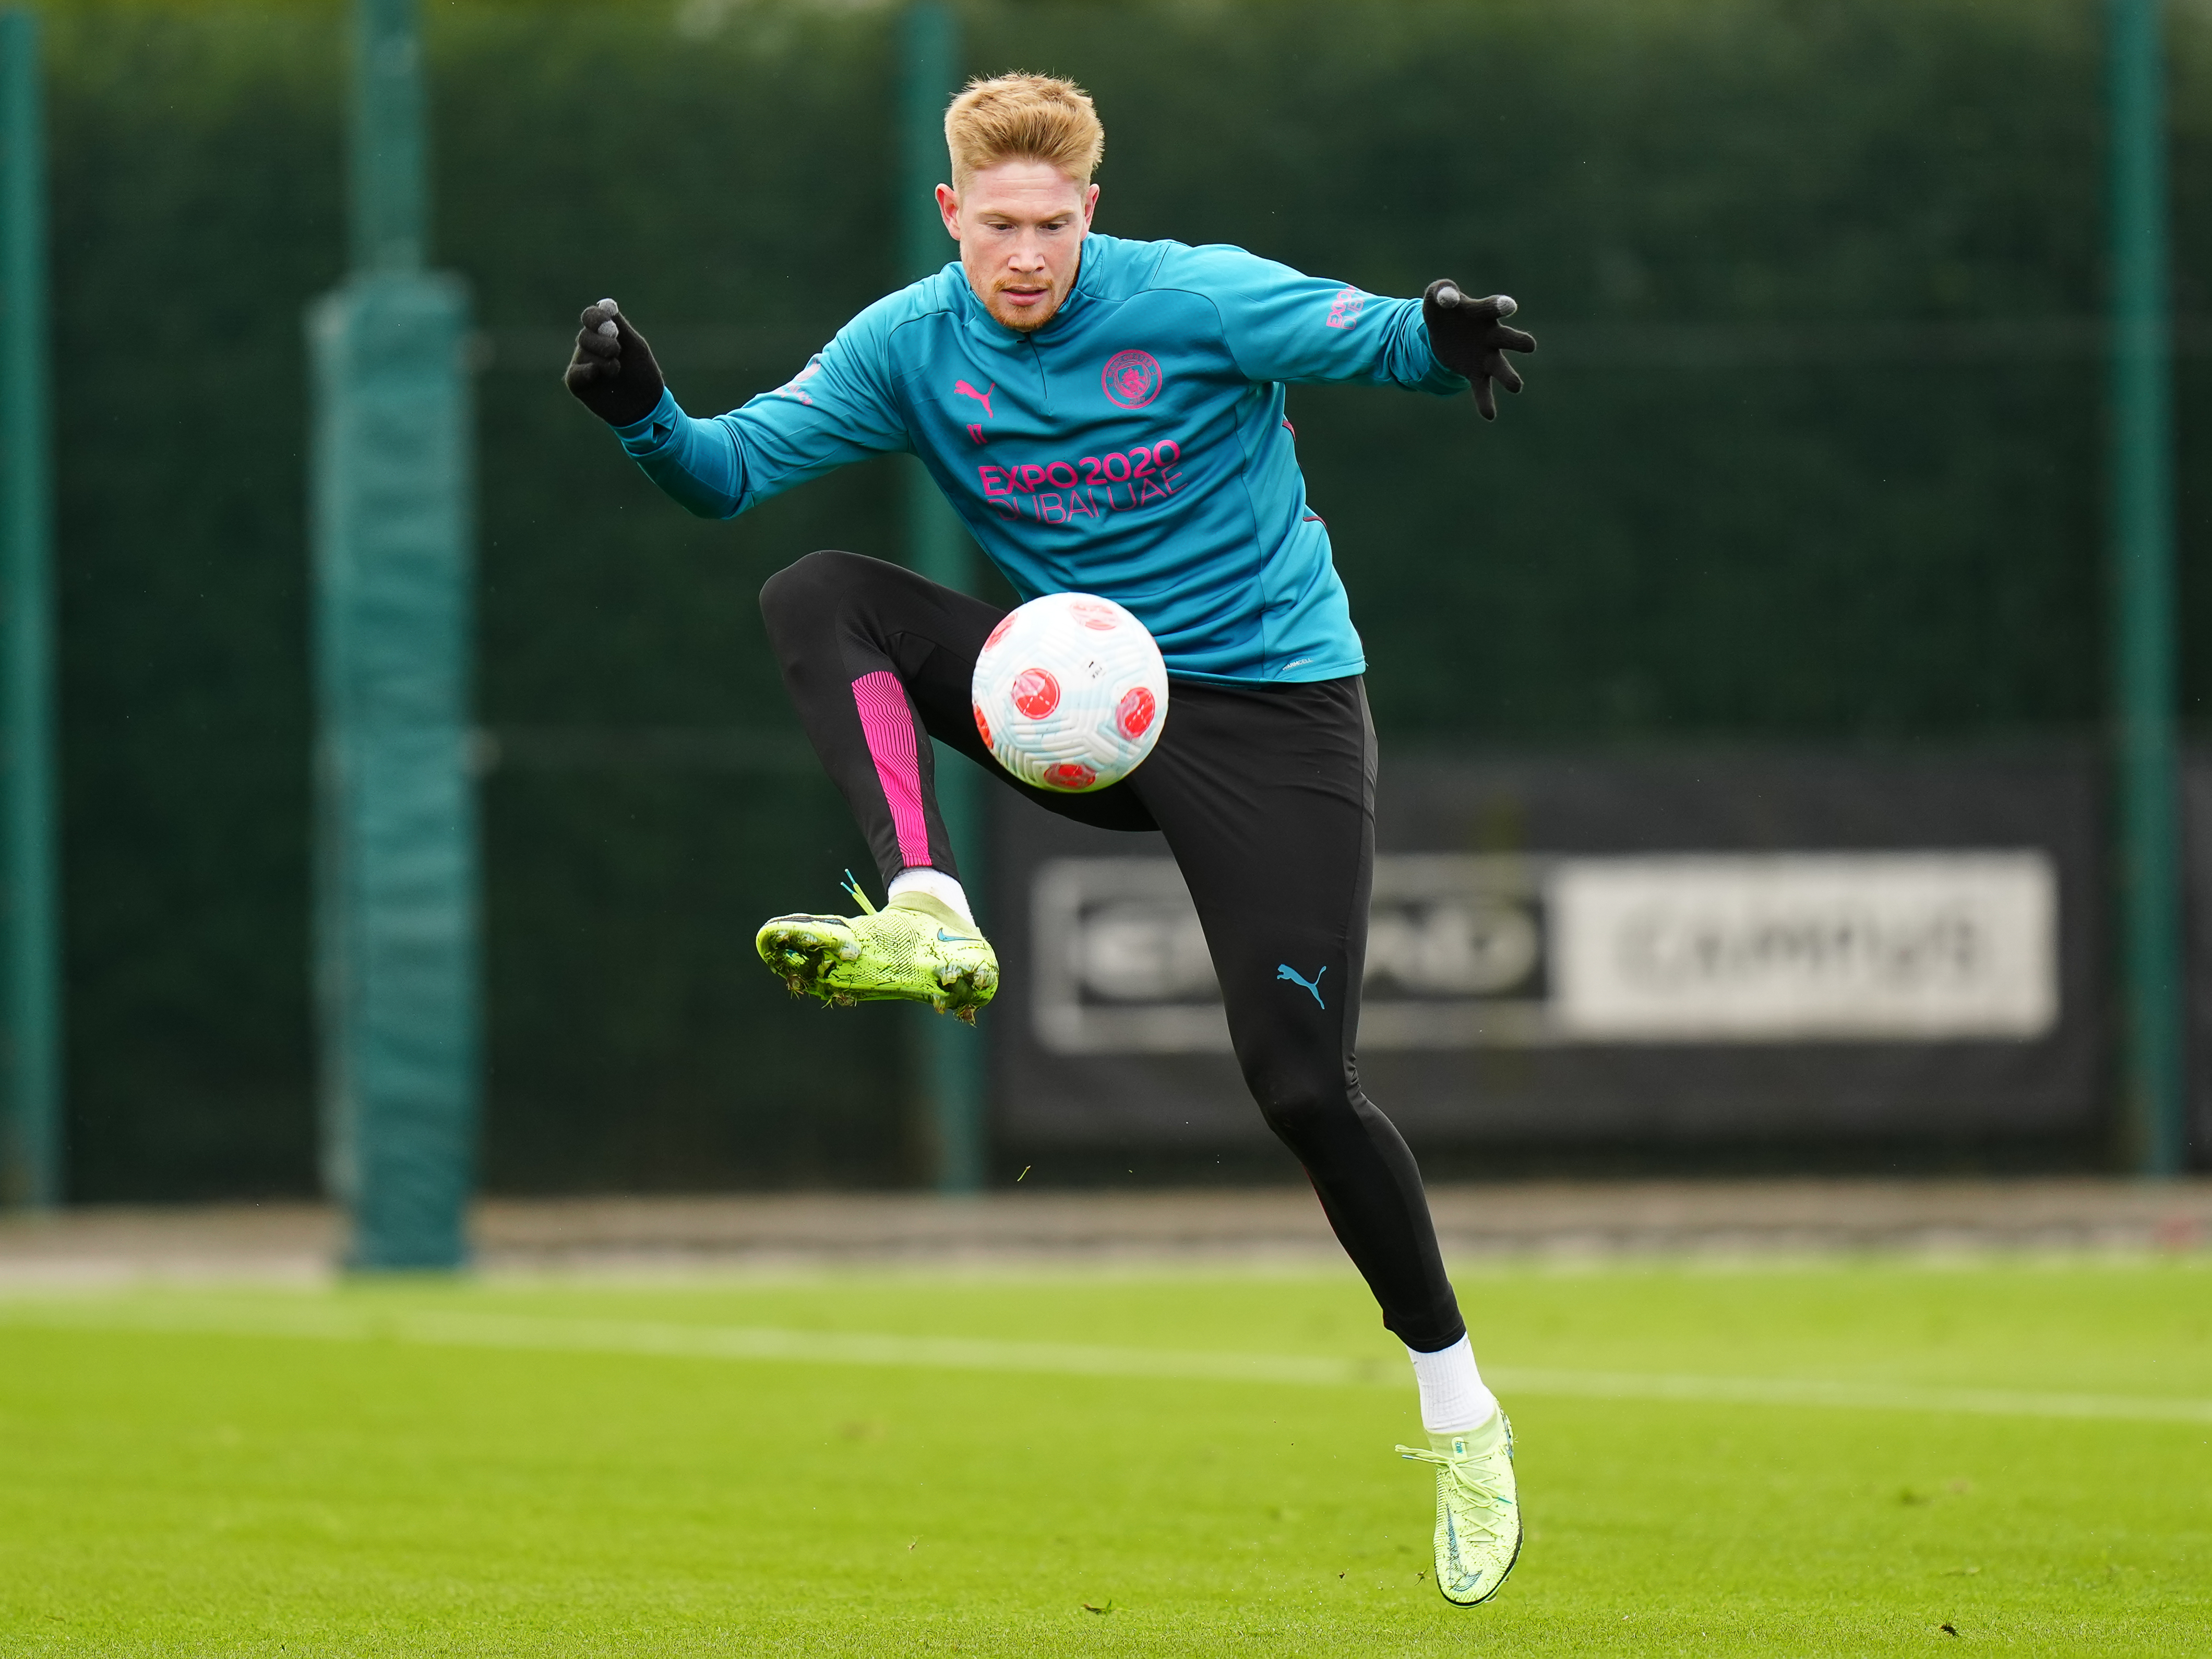 Manchester City’s Kevin De Bruyne in action during training at Manchester City Football Academy on April 1, 2022 in Manchester, England.